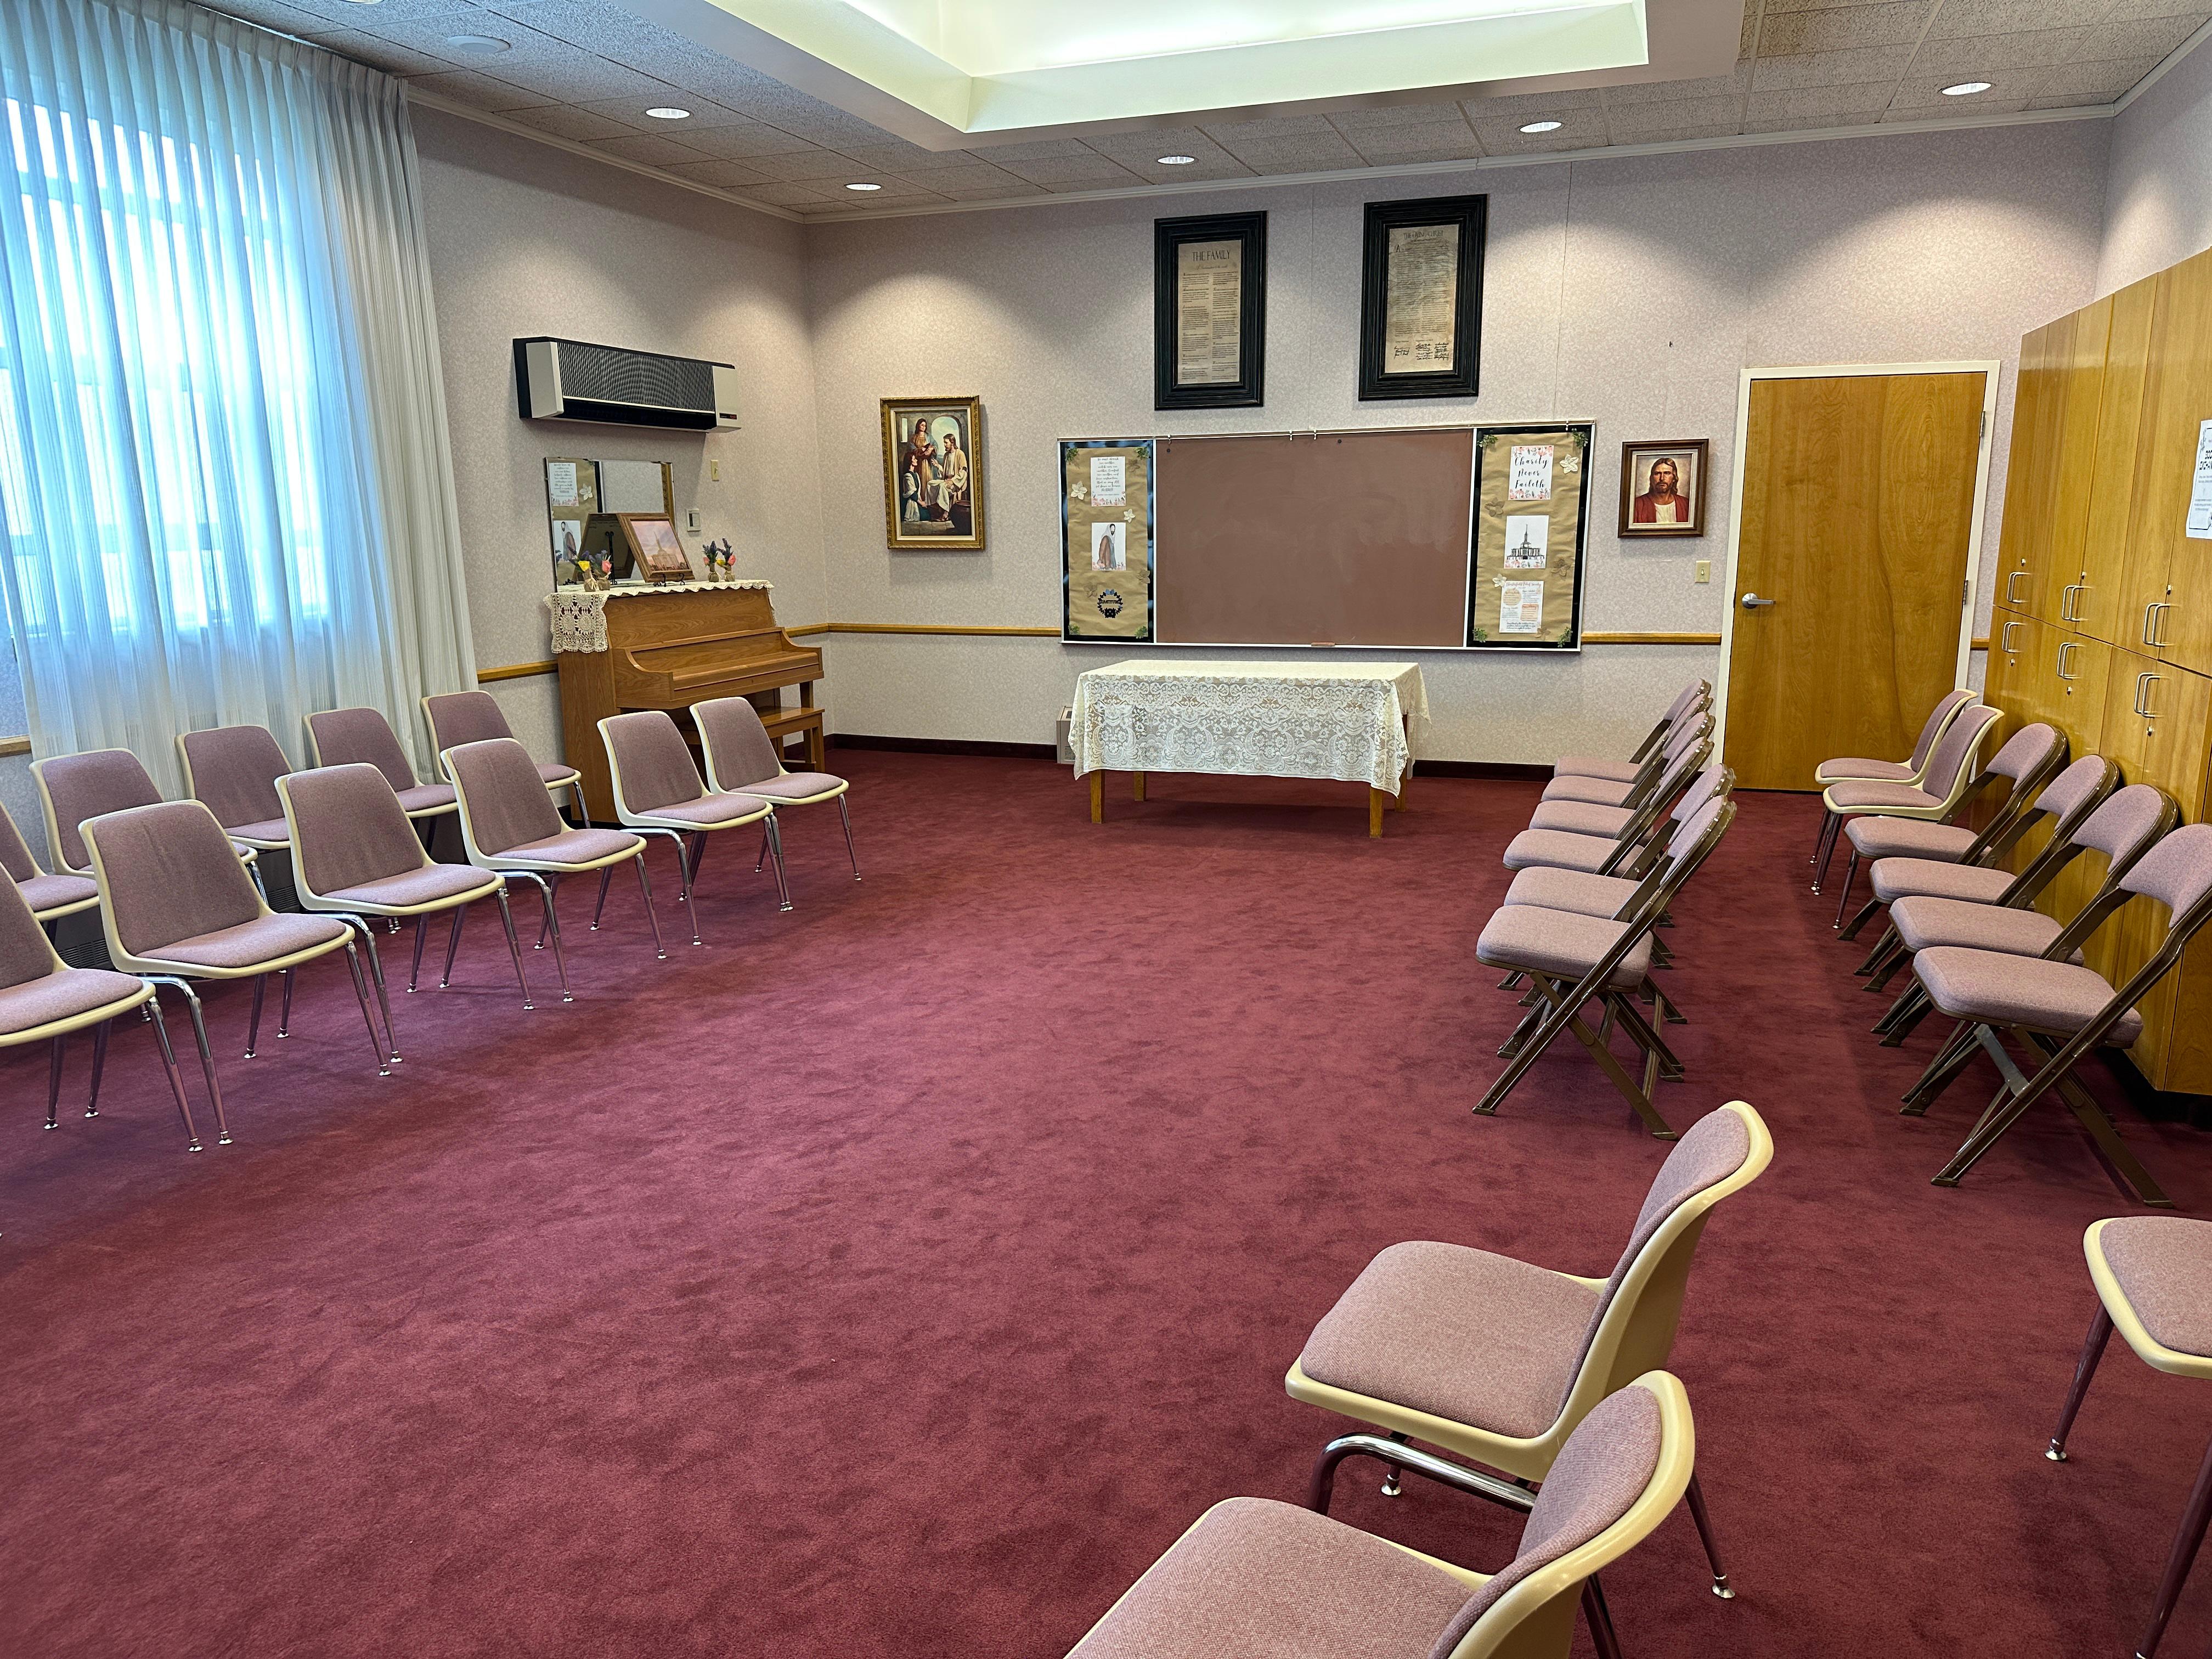 The Relief Society Room: This is where the women's organization in the Chesterfield congregation meet every second and fourth Sunday of the month.